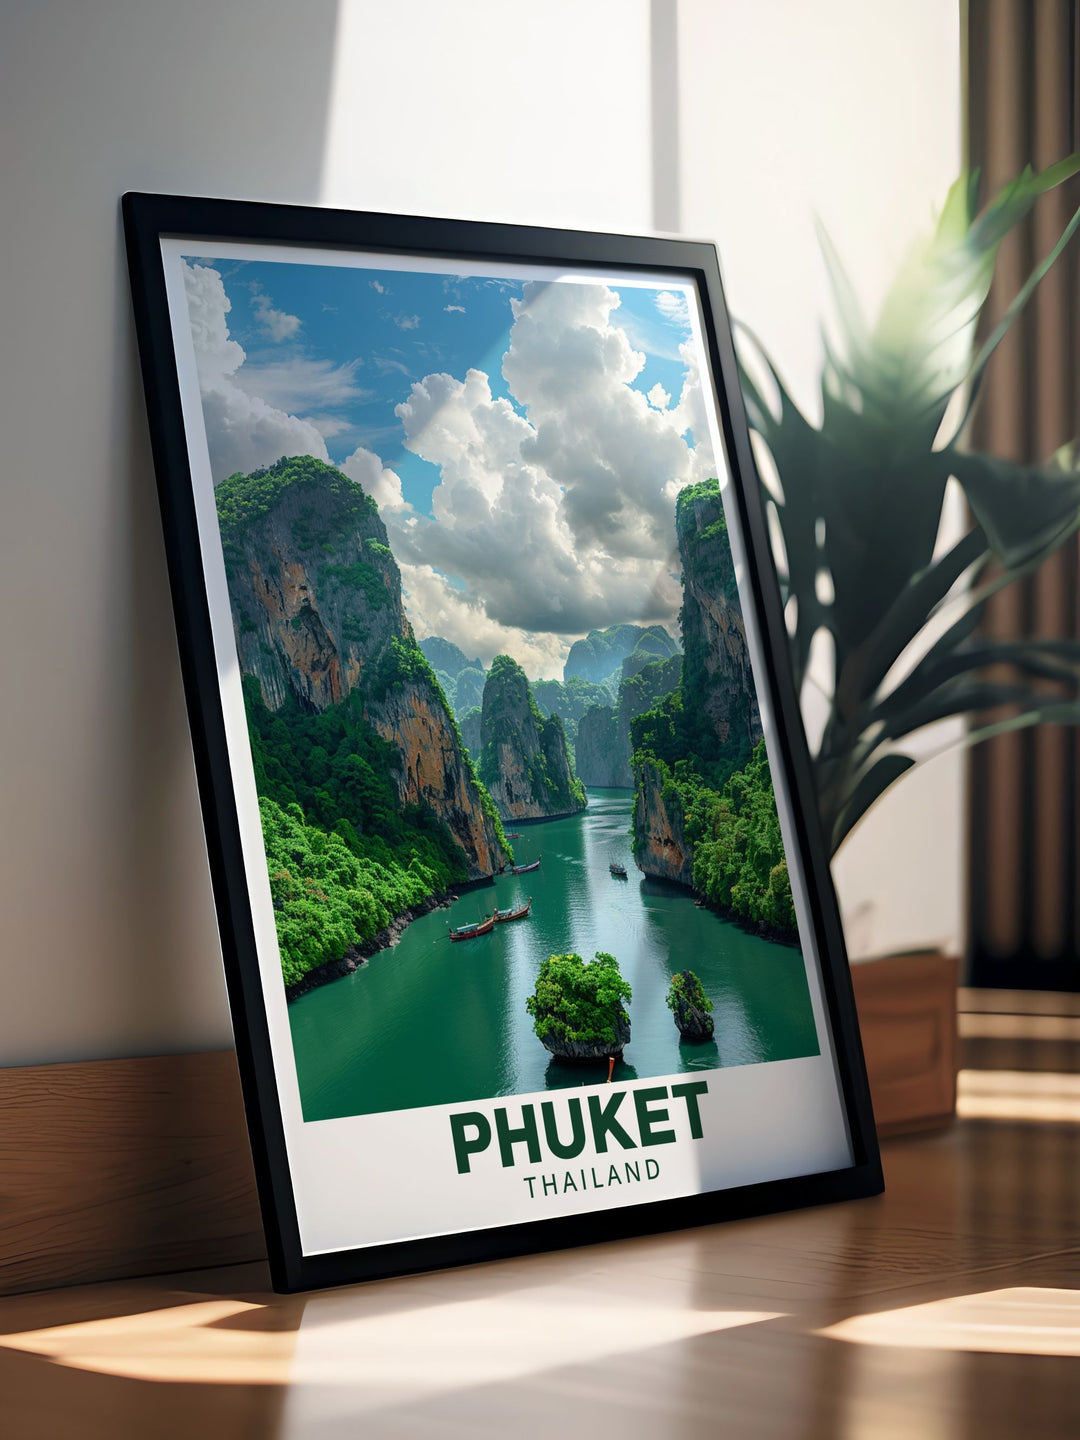 High quality Phang Nga Bay wall art capturing the essence of Thailands vibrant beach culture perfect for decorating your home with a touch of tropical paradise and inspiring future travels ideal for gifts and home decor